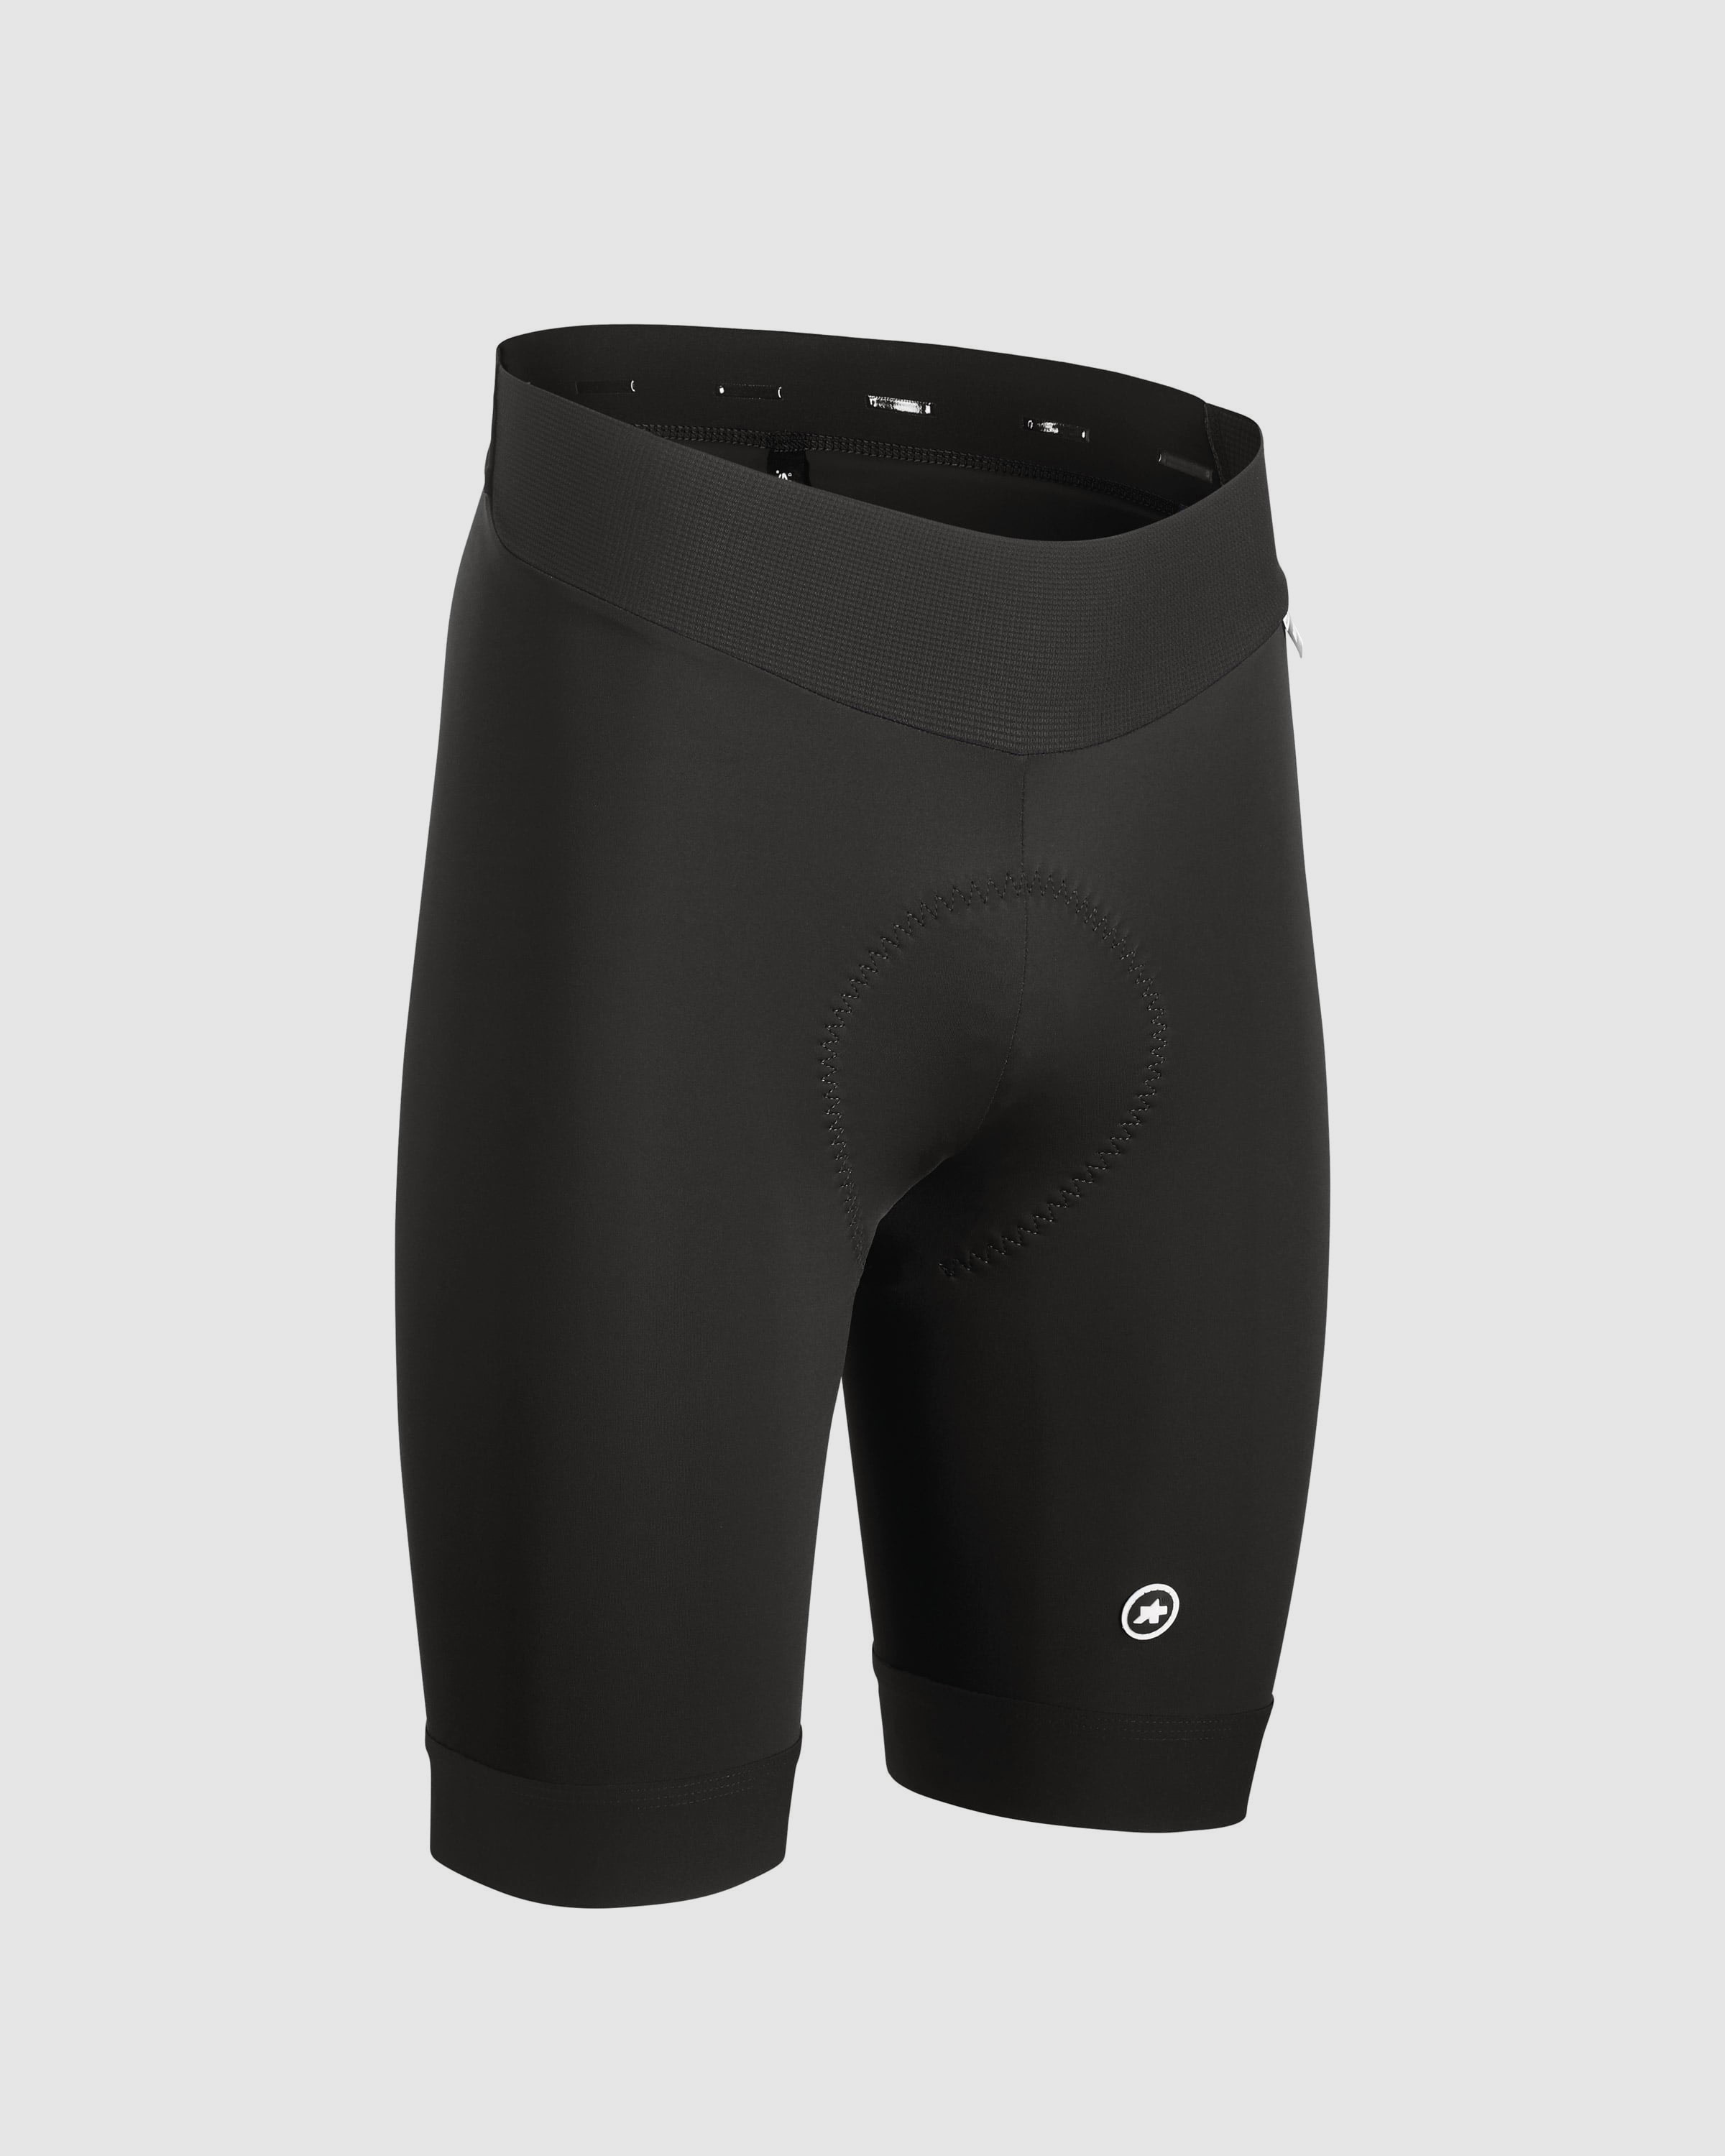 MILLE GT Half Shorts - ASSOS Of Switzerland - Official Outlet